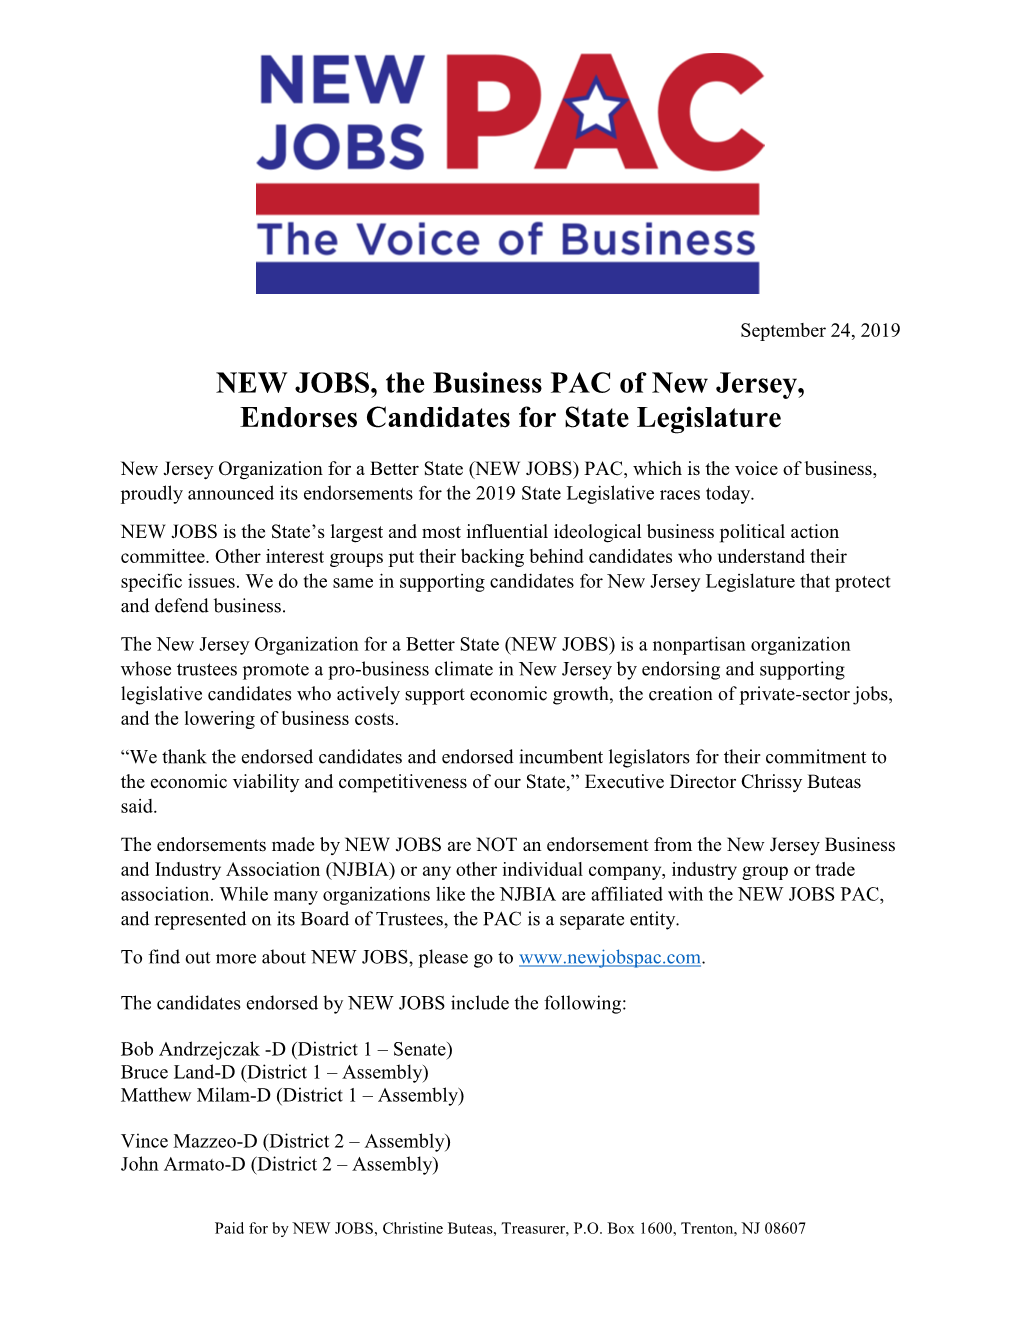 NEW JOBS, the Business PAC of New Jersey, Endorses Candidates for State Legislature